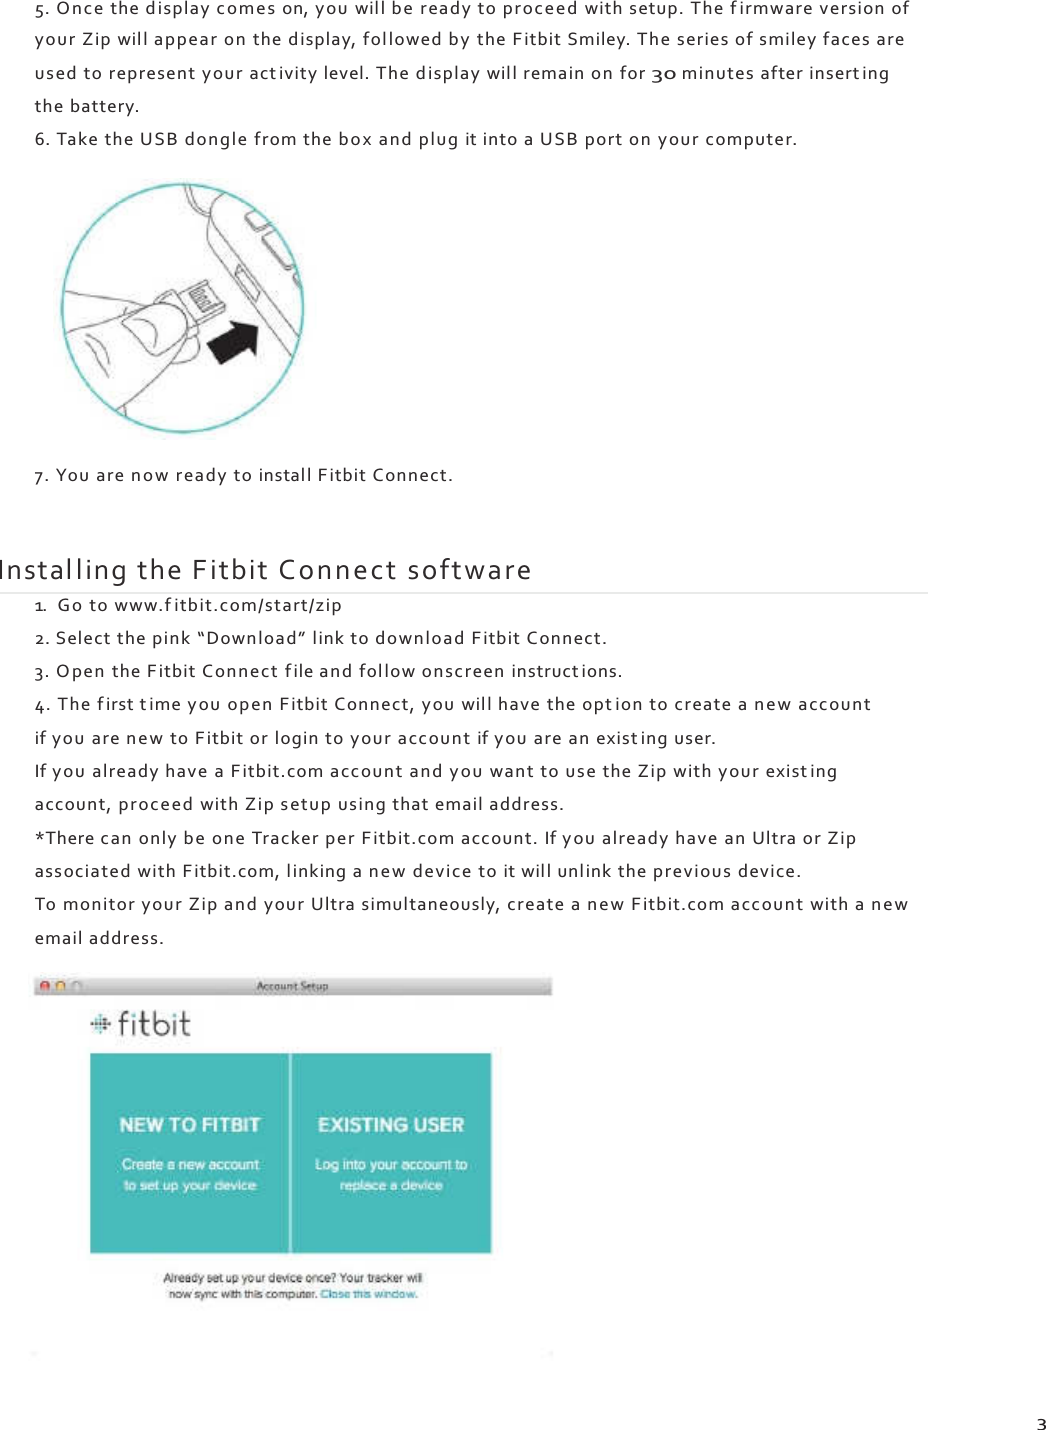 Fitbit FB150 Wireless Activity Tracker Dongle User Manual Zip Product